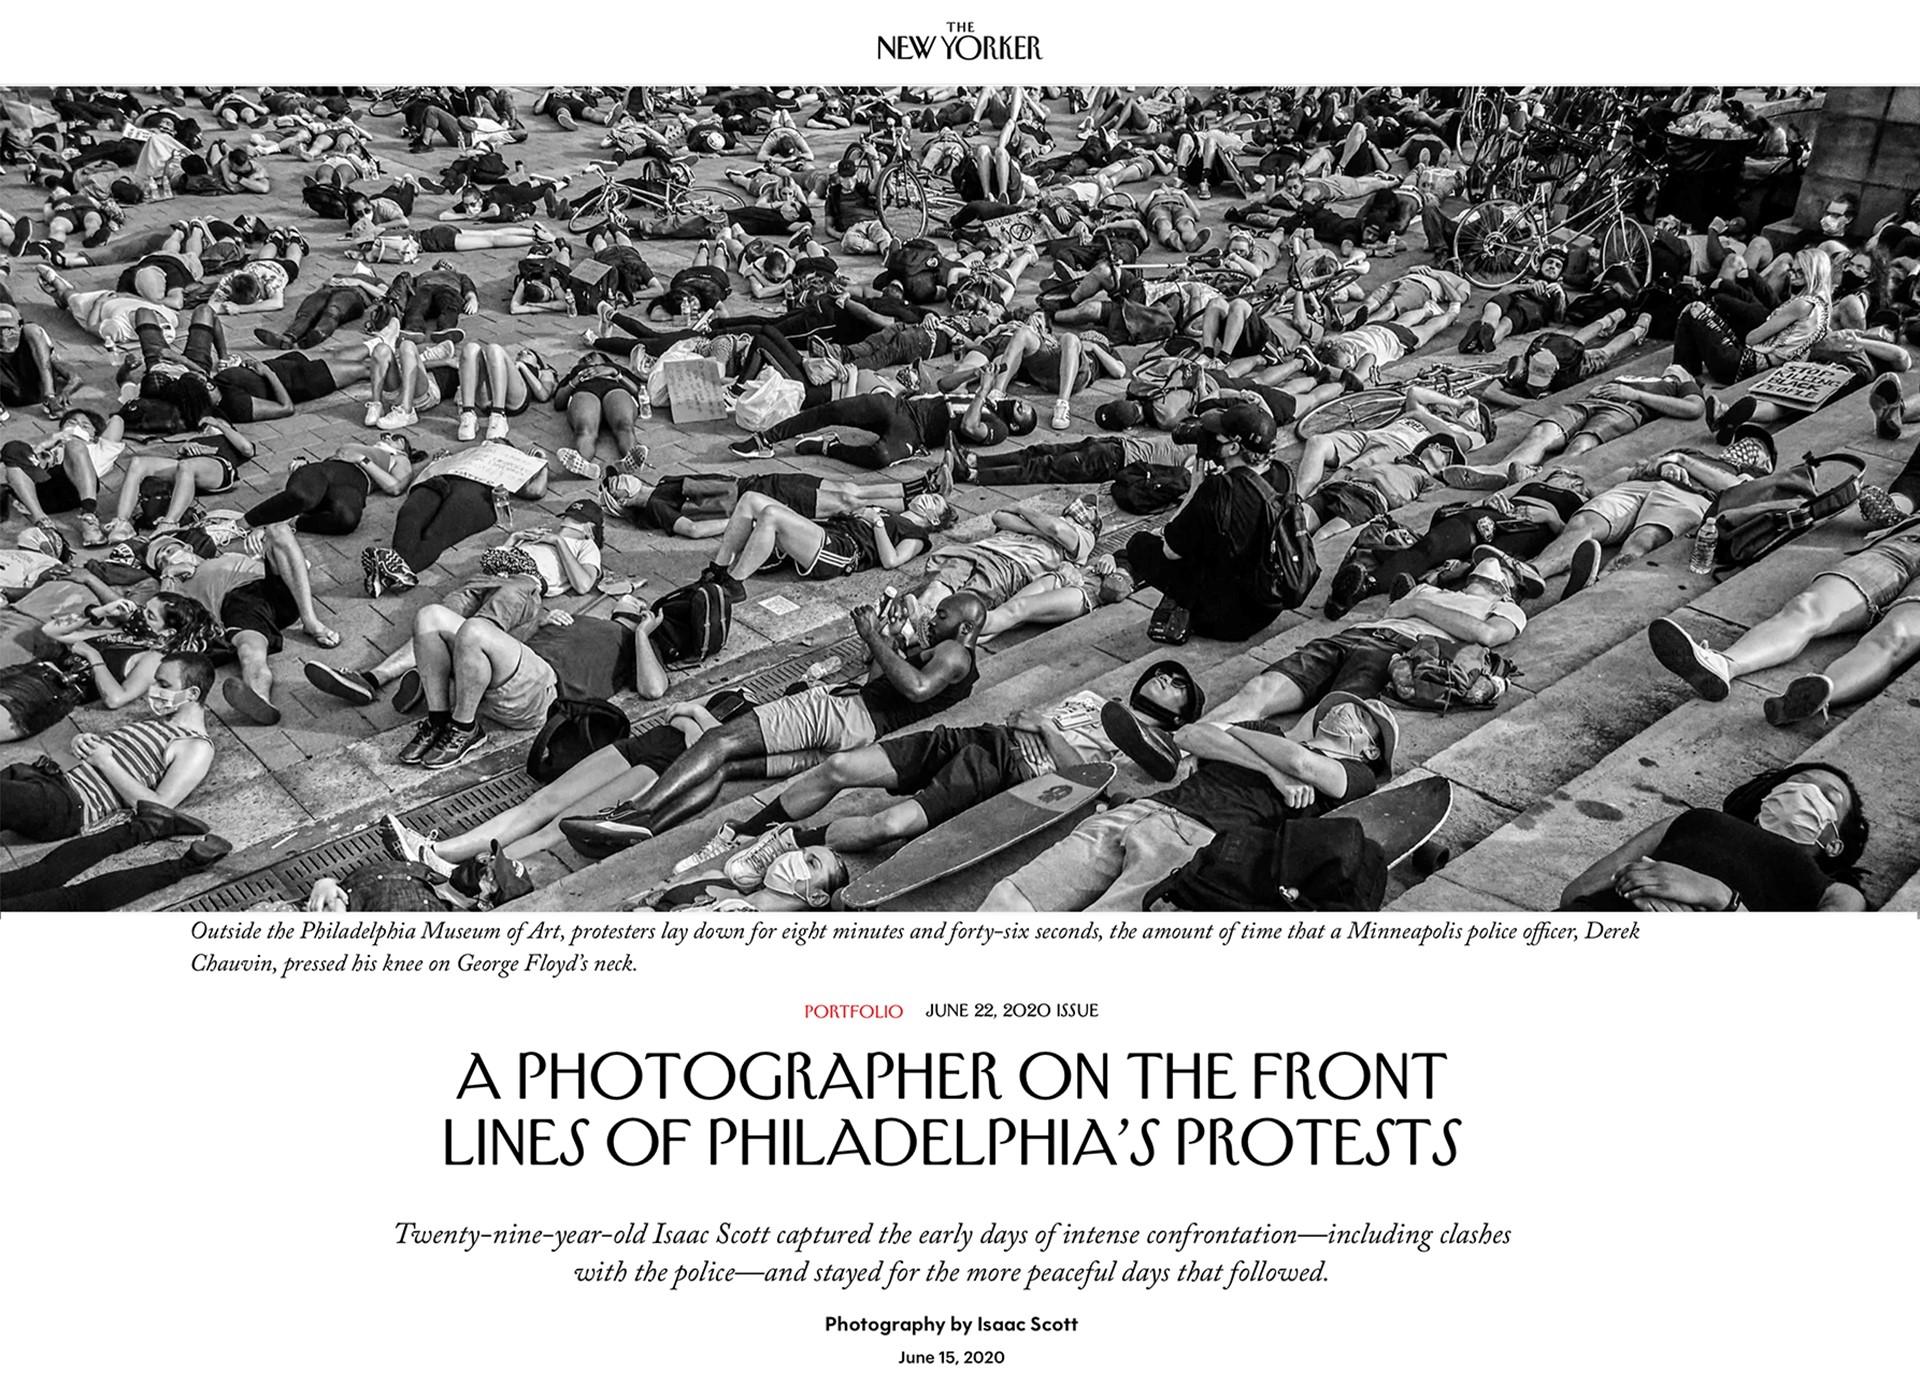 The New Yorker - Best News, Sports and Entertainment Photograph